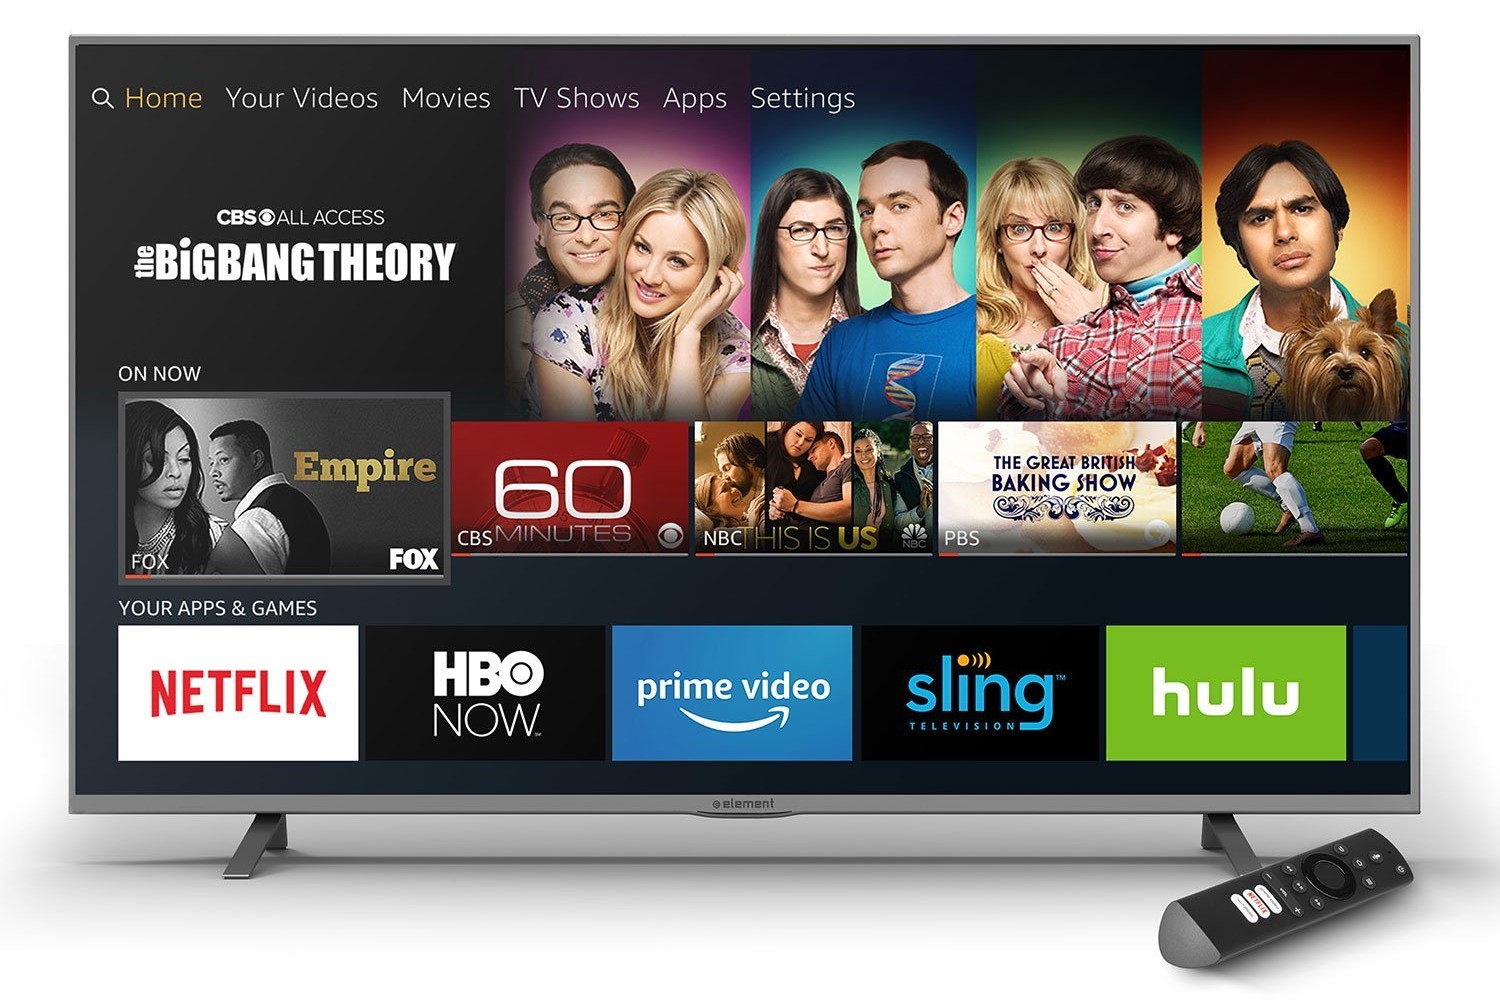 Is a New Amazon Fire TV Edition Smart TV Coming Out Soon? We Take a Look…